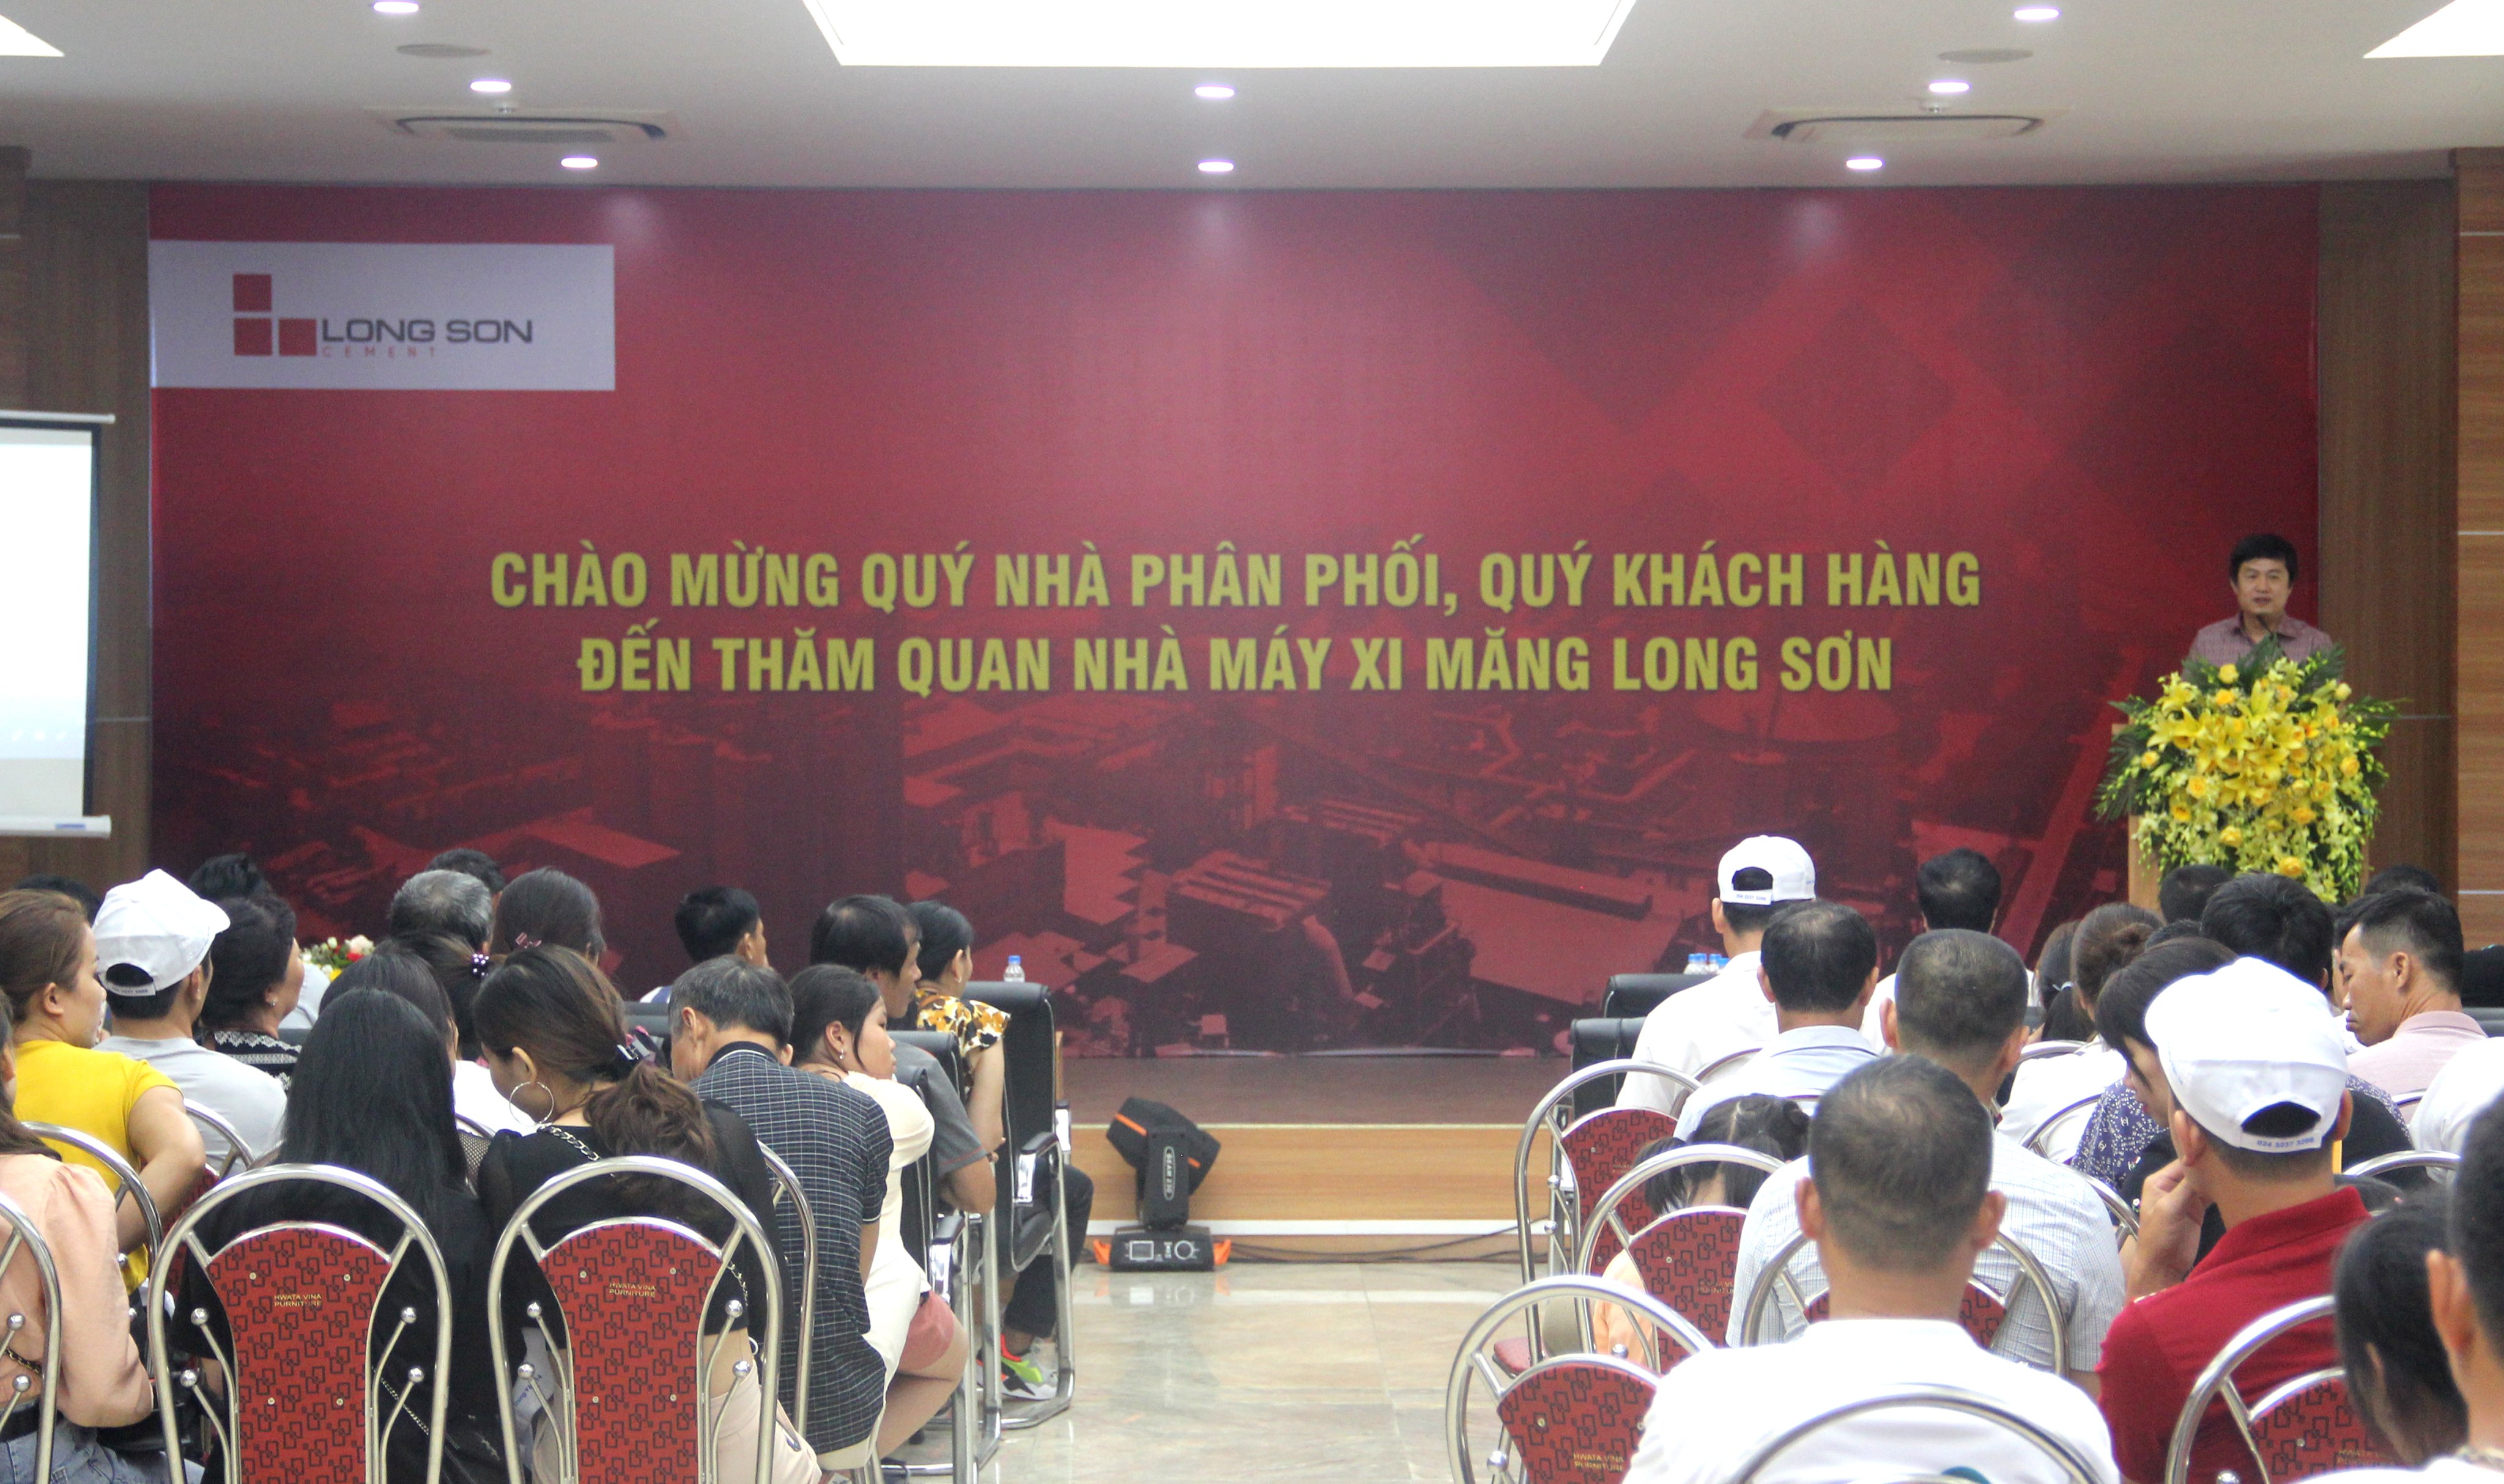 Long Son Cement welcomes customers from Hanoi to visit the company.